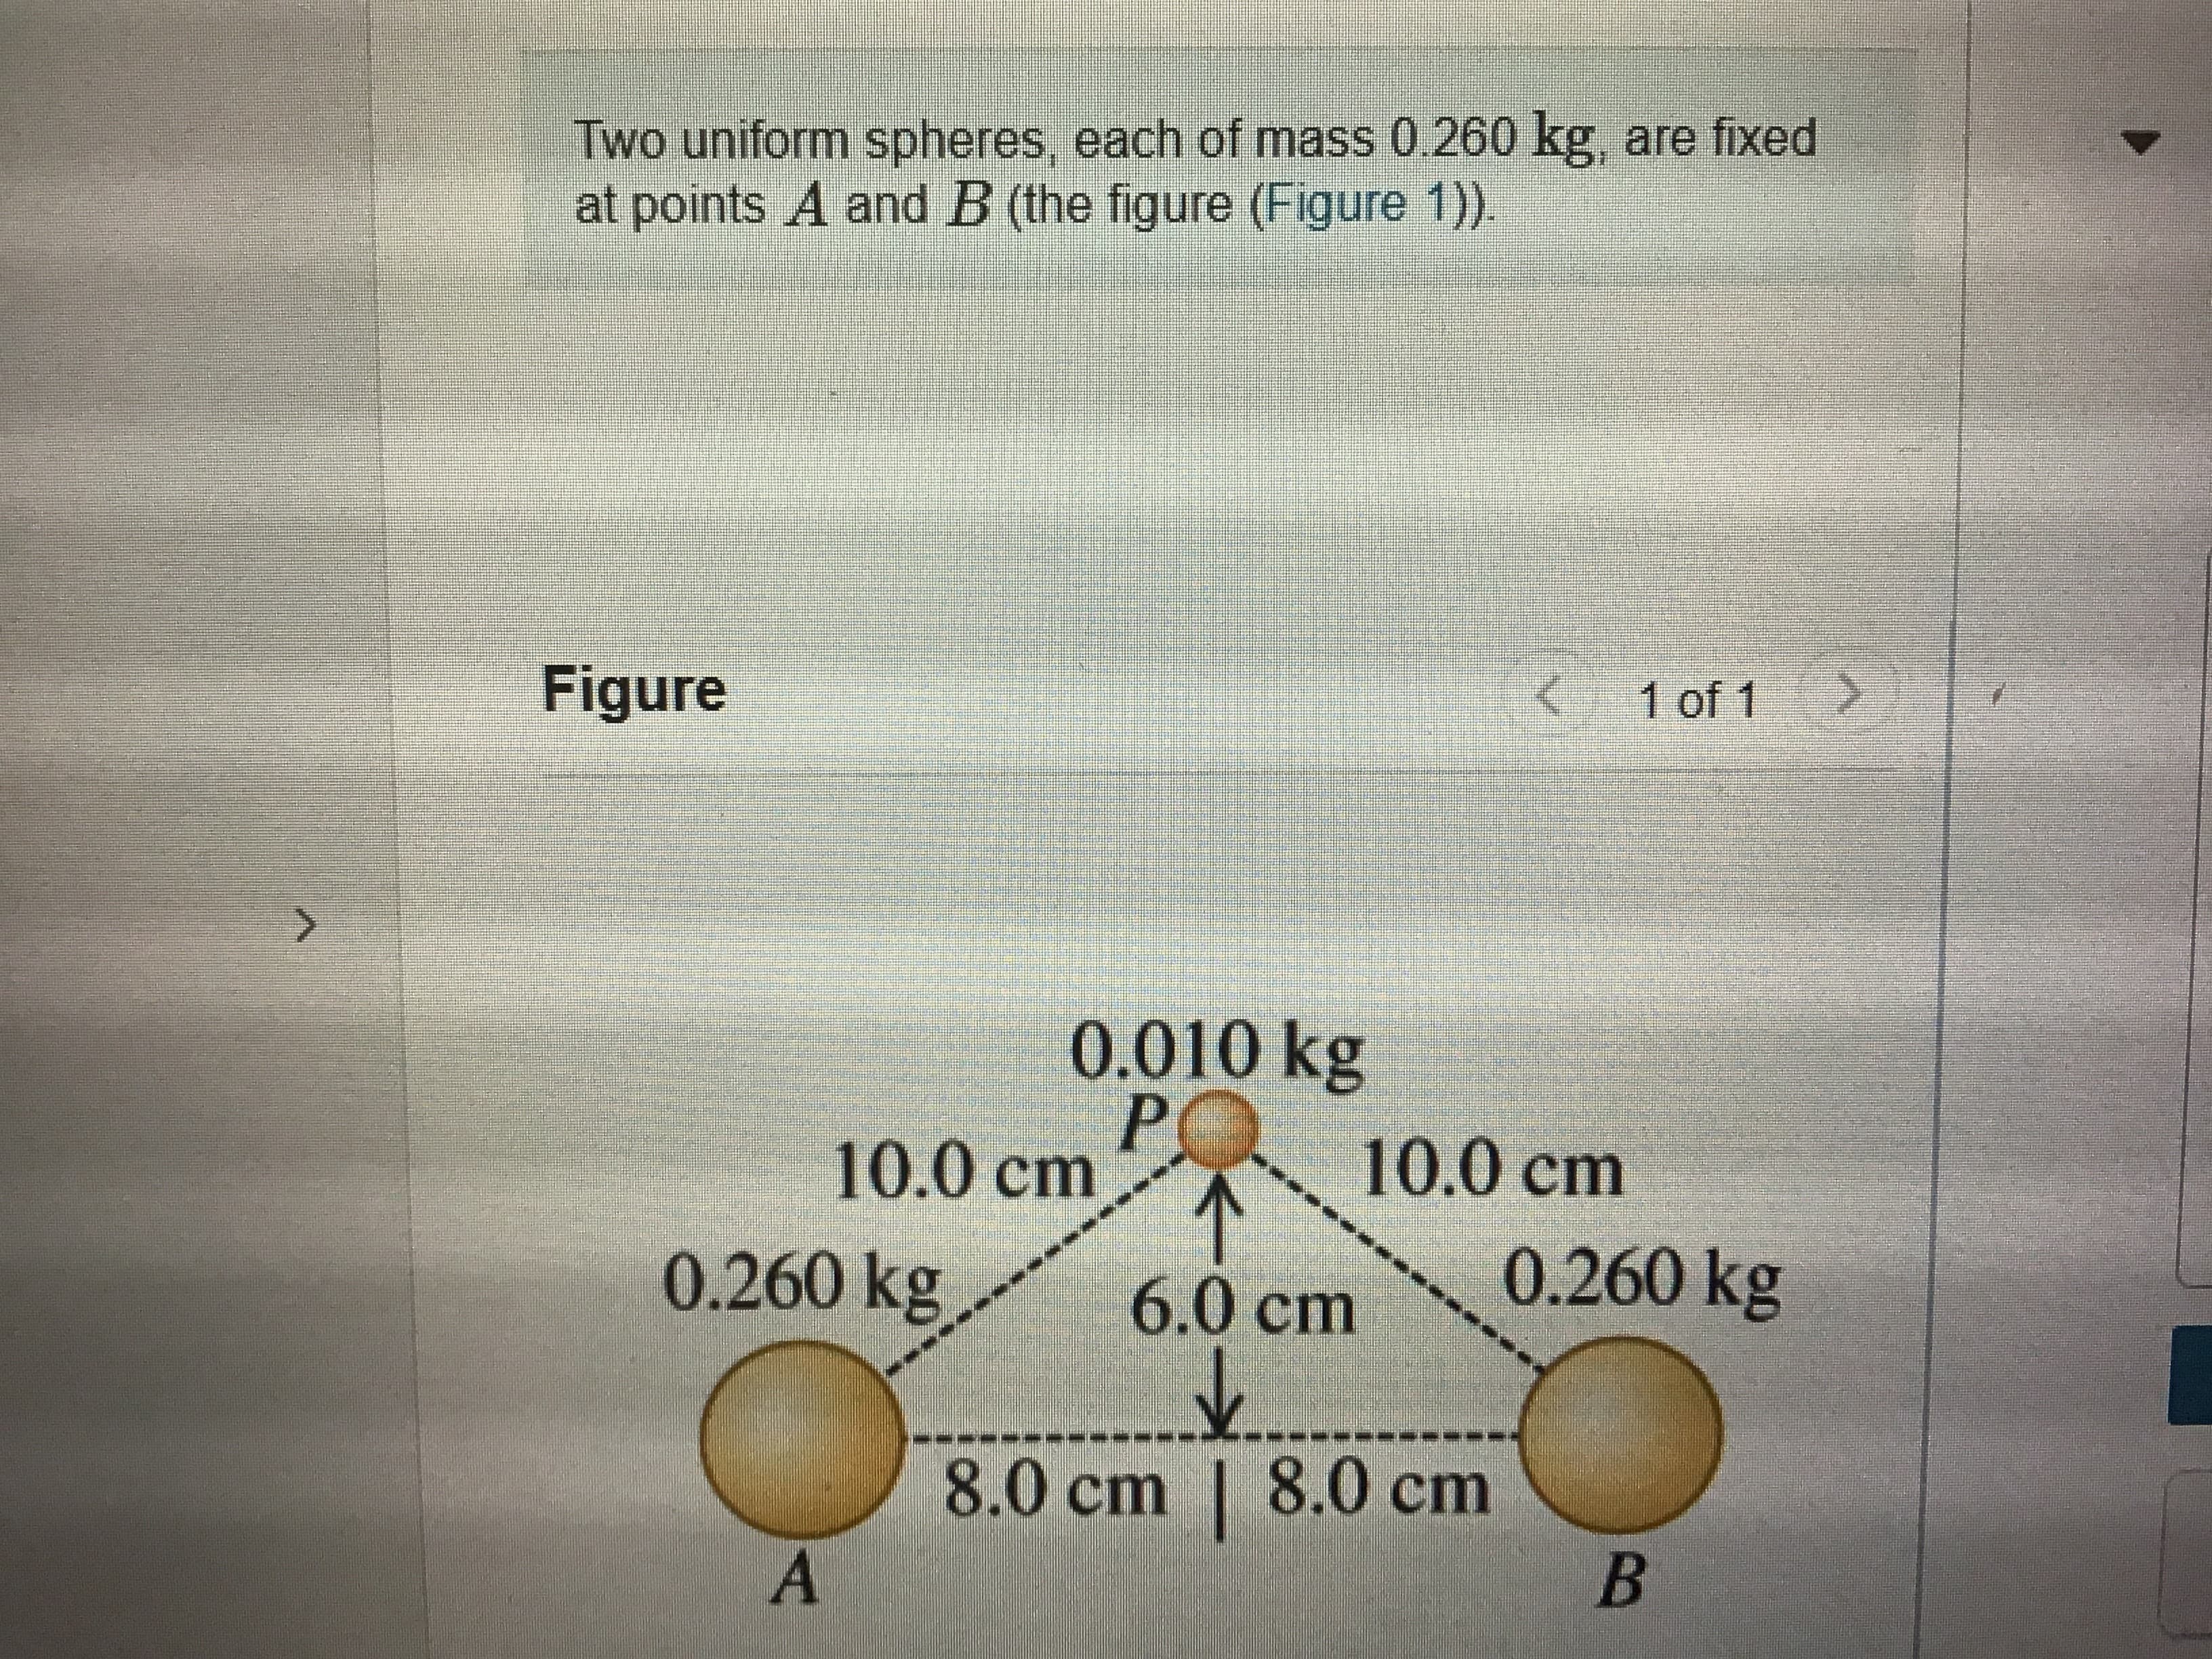 Two uniform spheres, each of mass 0.260 kg, are fixed
at points A and B (the figure (Figure 1).
Figure
1 of 1
0.010 kg
10.0 cm
10.0cm
0.260 kg
6.0cm
0.260 kg
8.0cm | 8.0 cm
